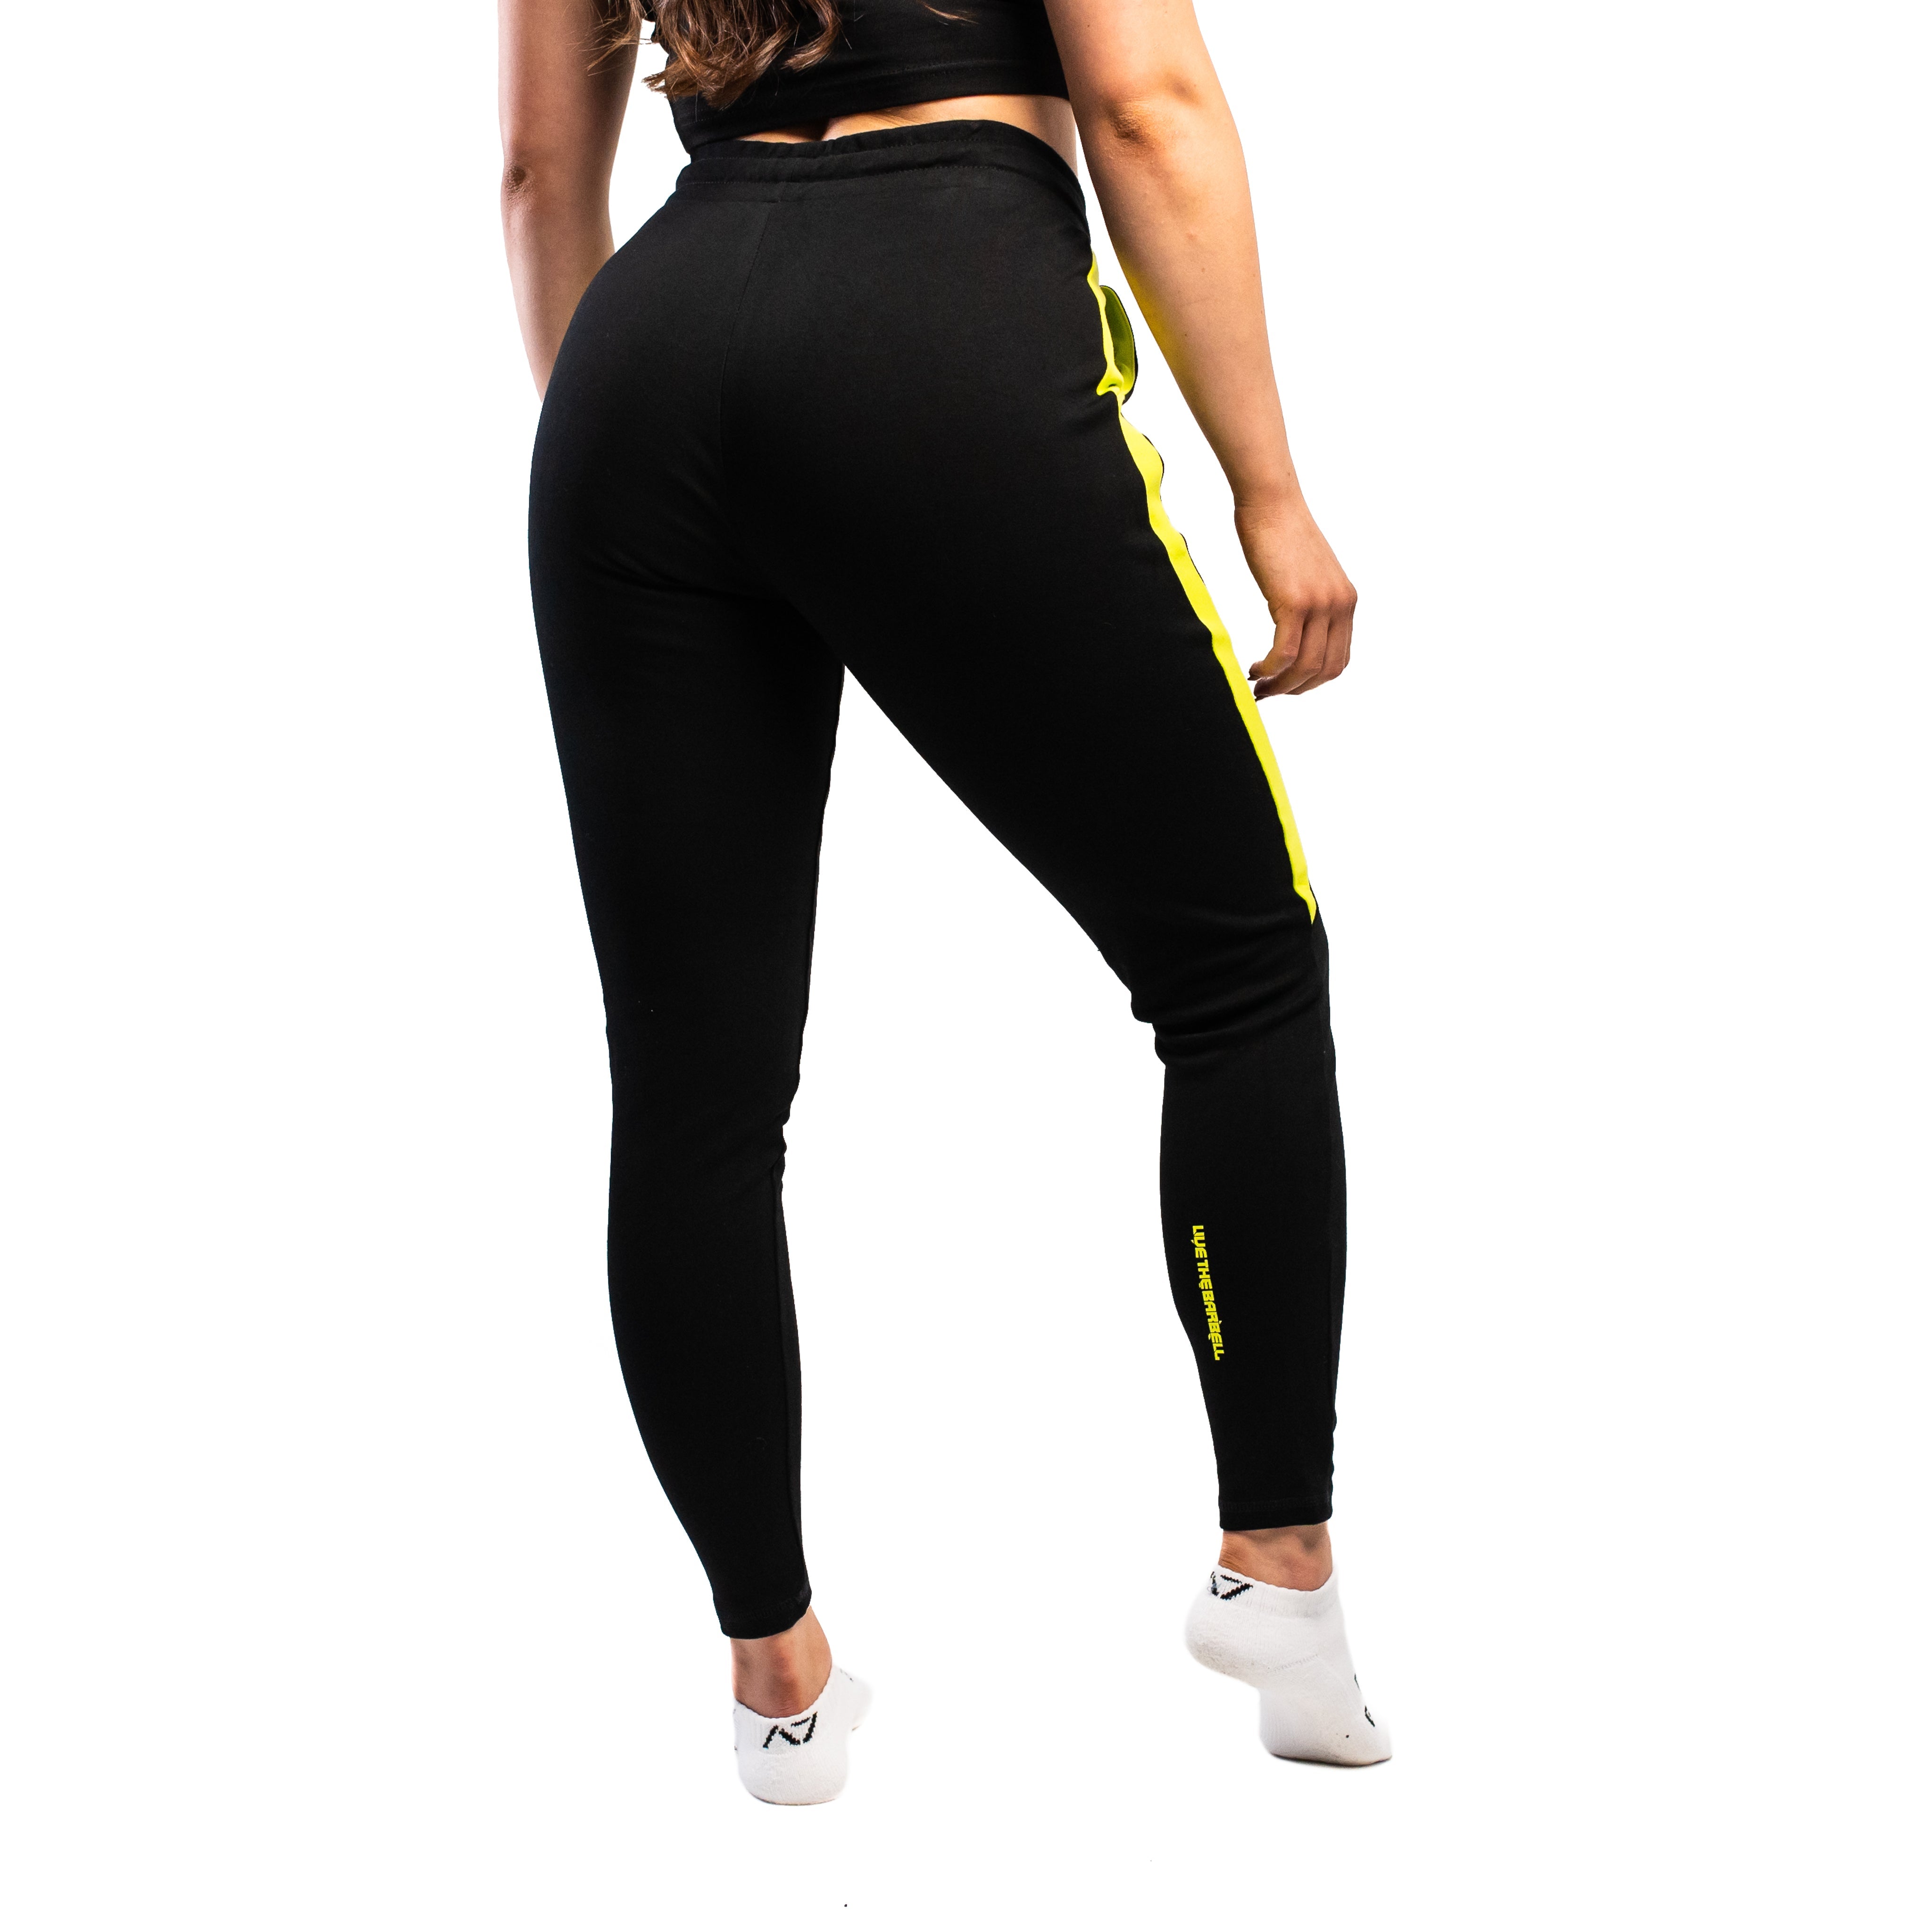 Our Moxie Joggers are made with premium cotton spandex fabric to keep you comfy throughout the day whether you are training or going out! Our Moxie Joggers contour to your body and feature a reflective stripe on both side, deep un-zippered pockets and stealth matte logos. Now in our new Inferno colourway. You can purchase Hinge Moxie joggers from A7 UK or A7 Europe. A7 UK shipping to UK, Ireland, France, Italy, Germany, the Netherlands, Sweden and Poland.